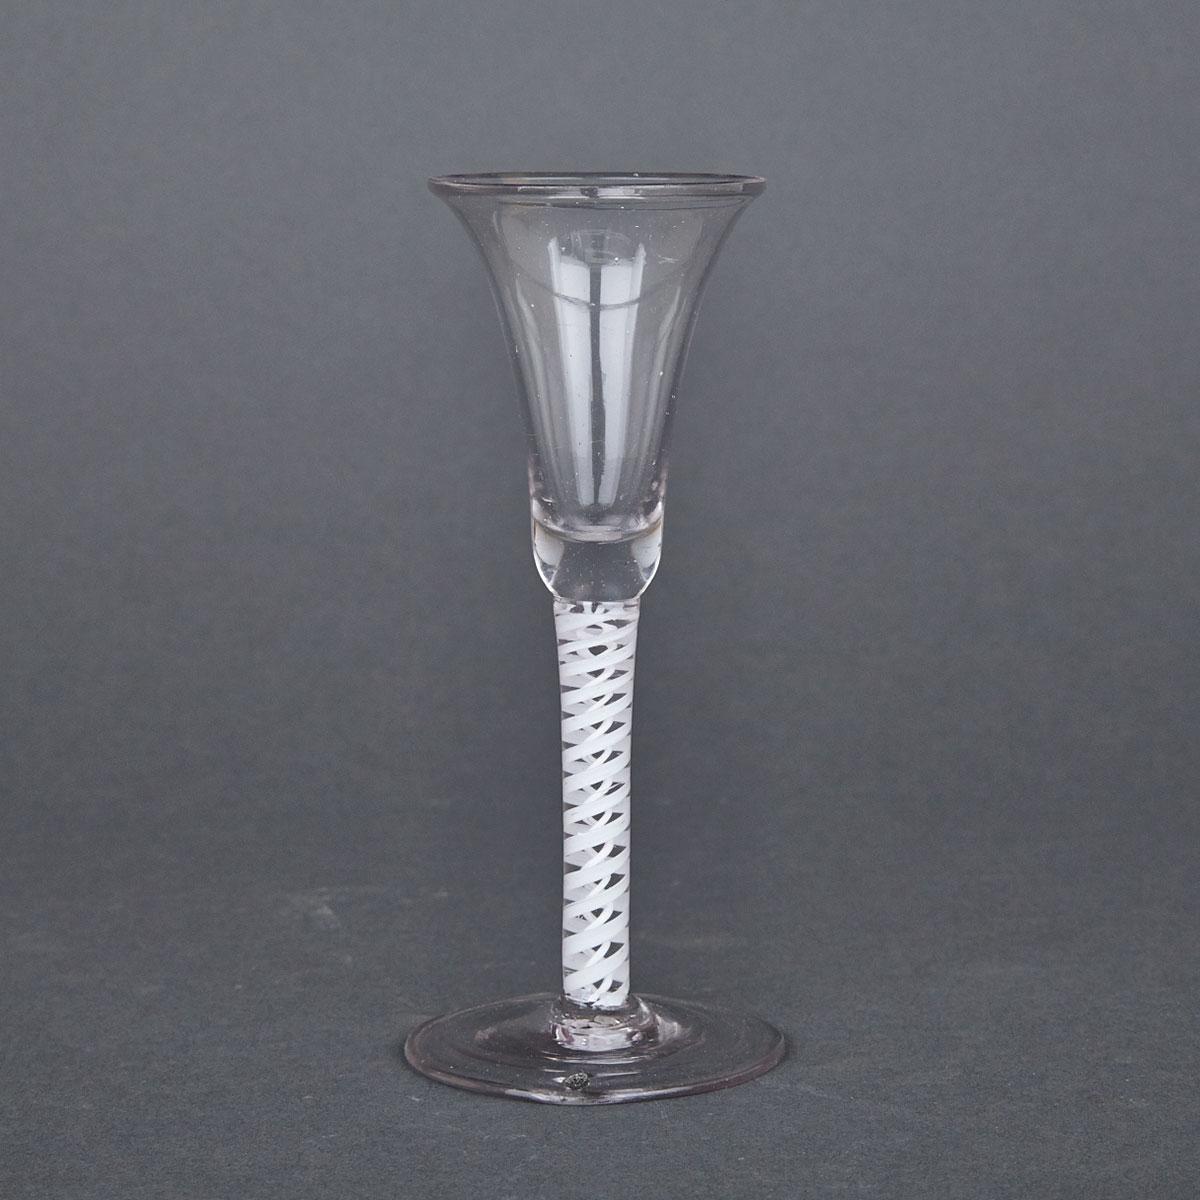 Continental Opaque Twist Stemmed Wine Glass, late 18th century